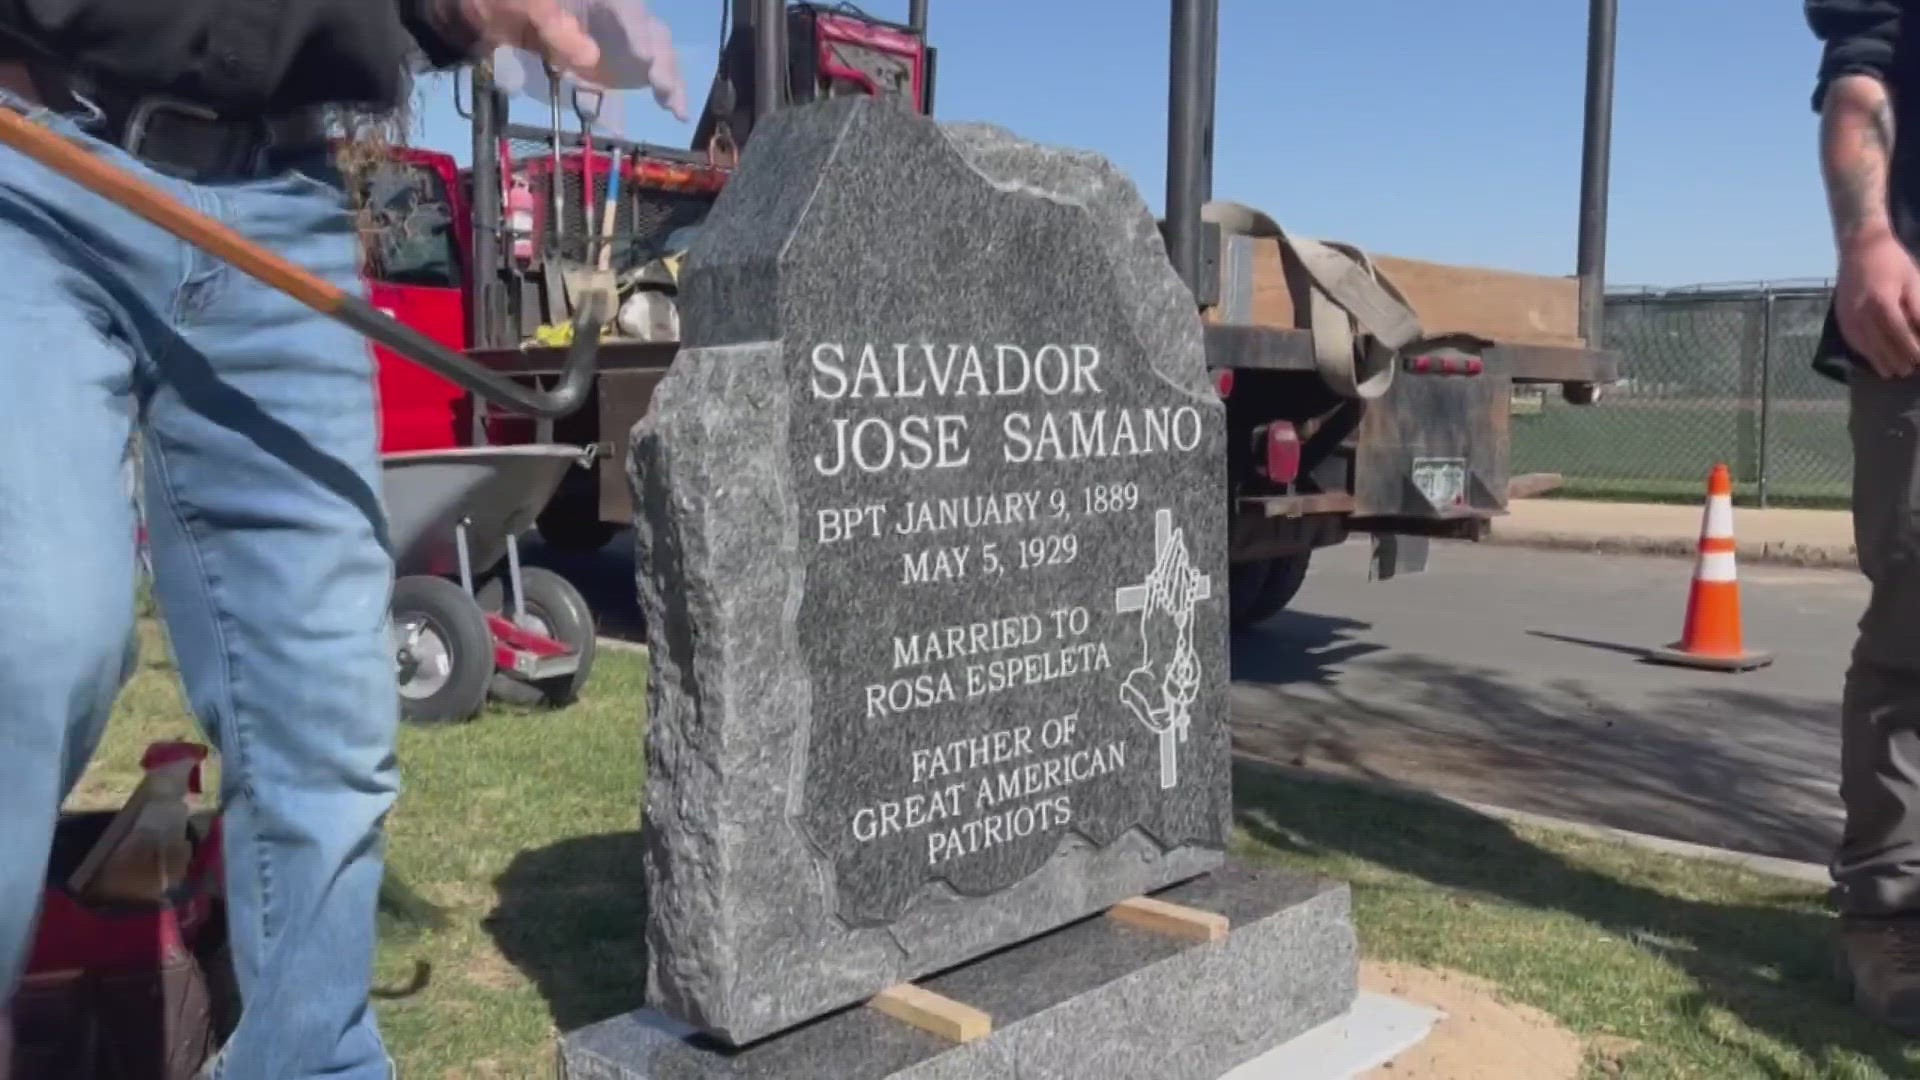 Their grandfather's grave -- lost for decades -- has been found again, in Lafayette.